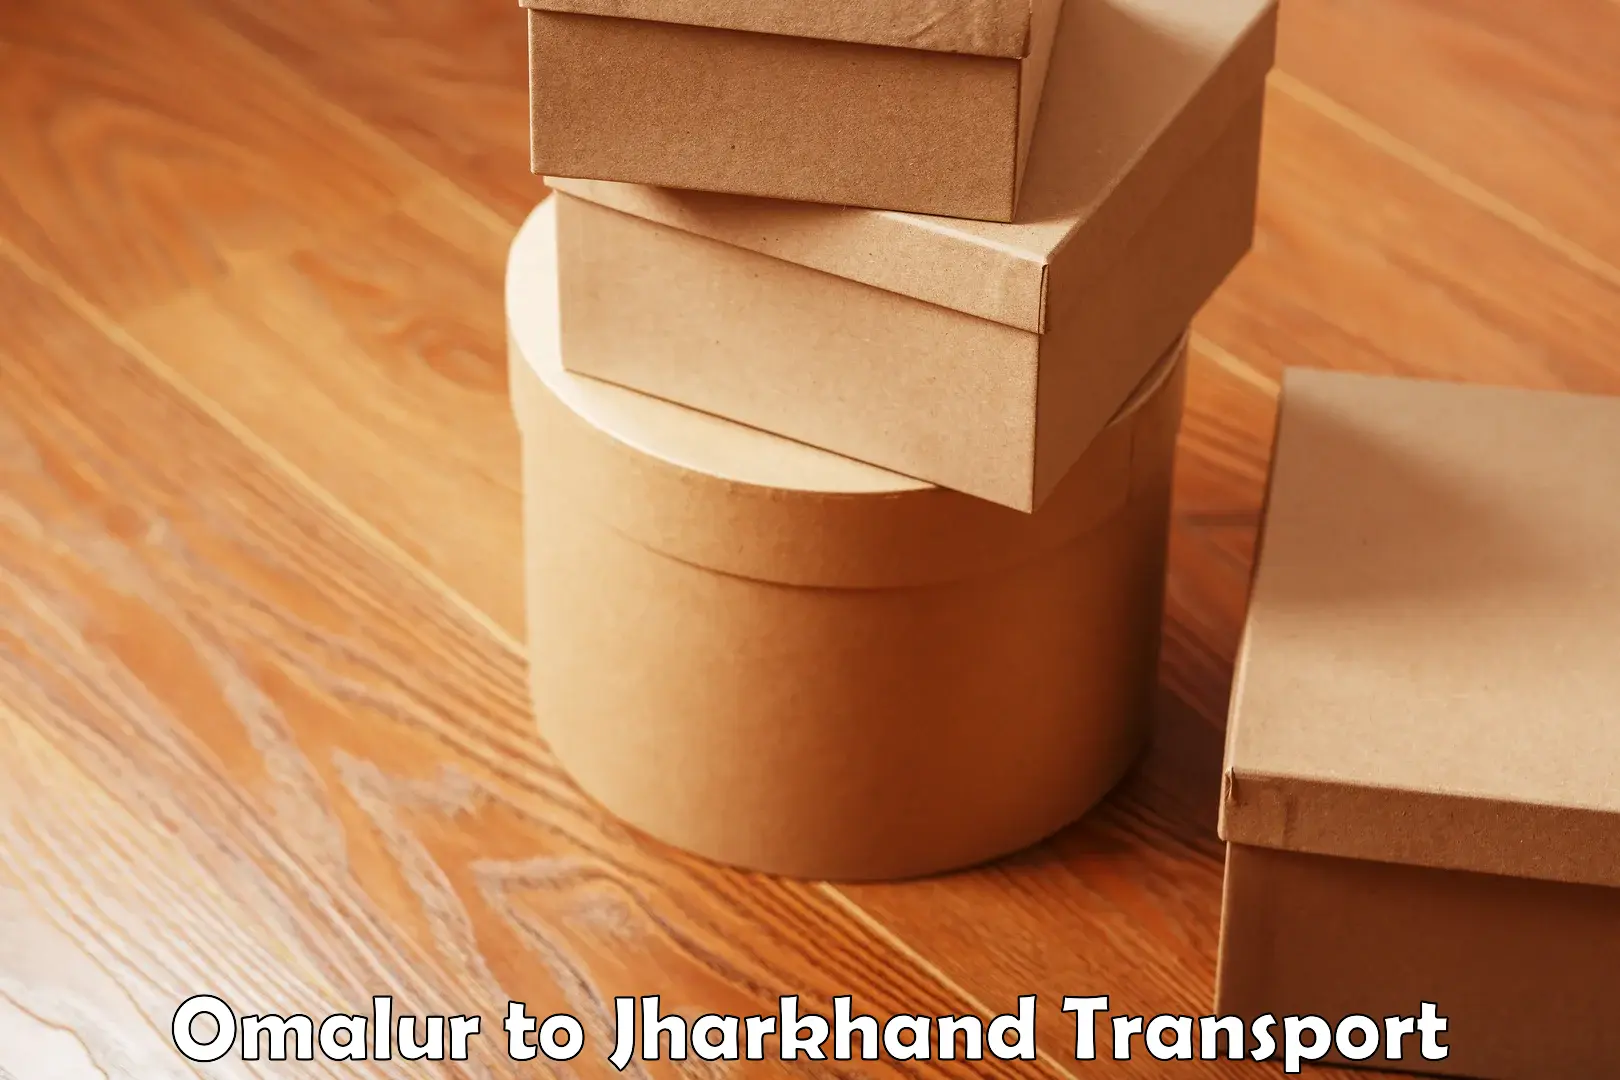 Furniture transport service Omalur to Jharkhand